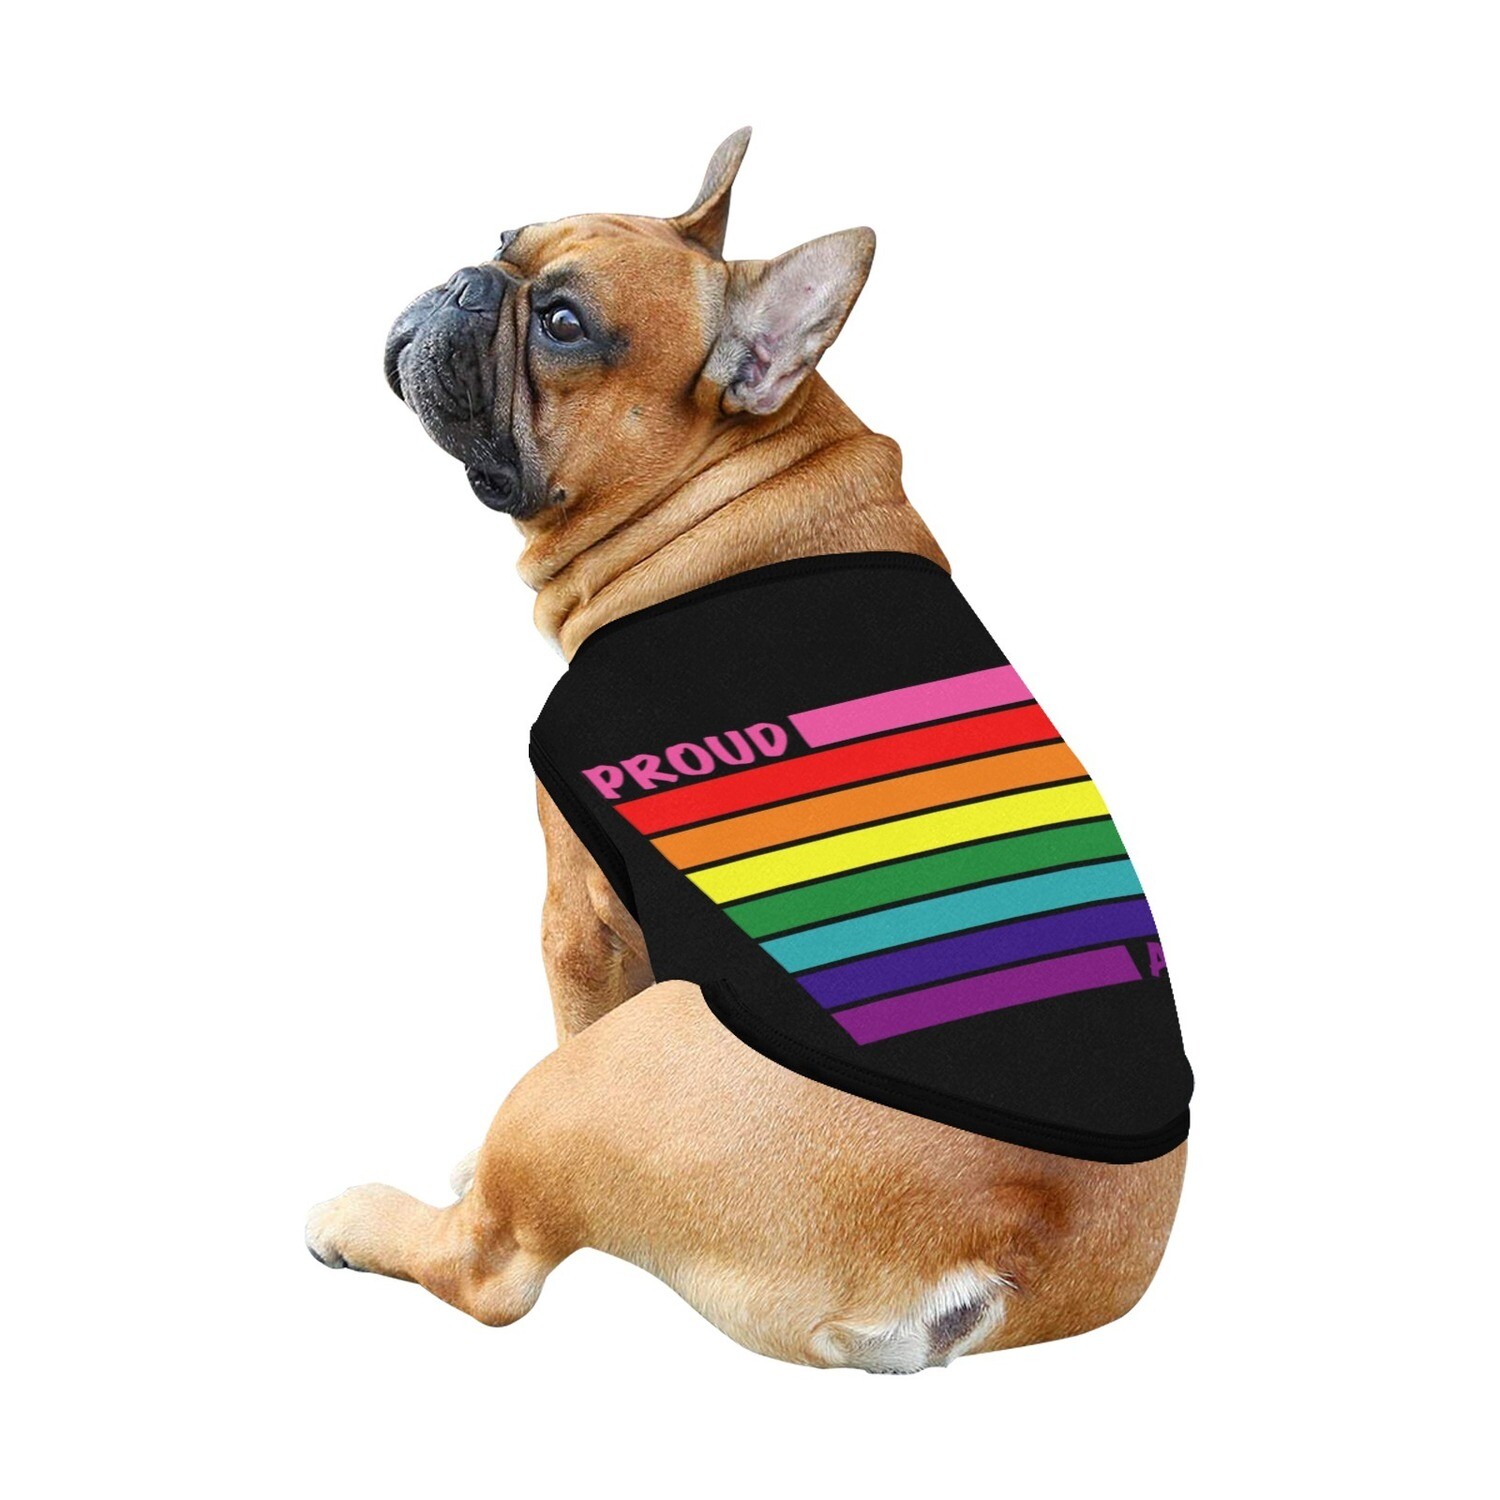 🐕🏳️‍🌈 Love is Love LGBTQProud Ally, Dog Tank Top, Dog shirt, Dog t-shirt, Dog clothes, Dog clothing, 7 sizes XS to 3XL, LGBT, Dog gift, Gift for dogs, pride flag, rainbow flag